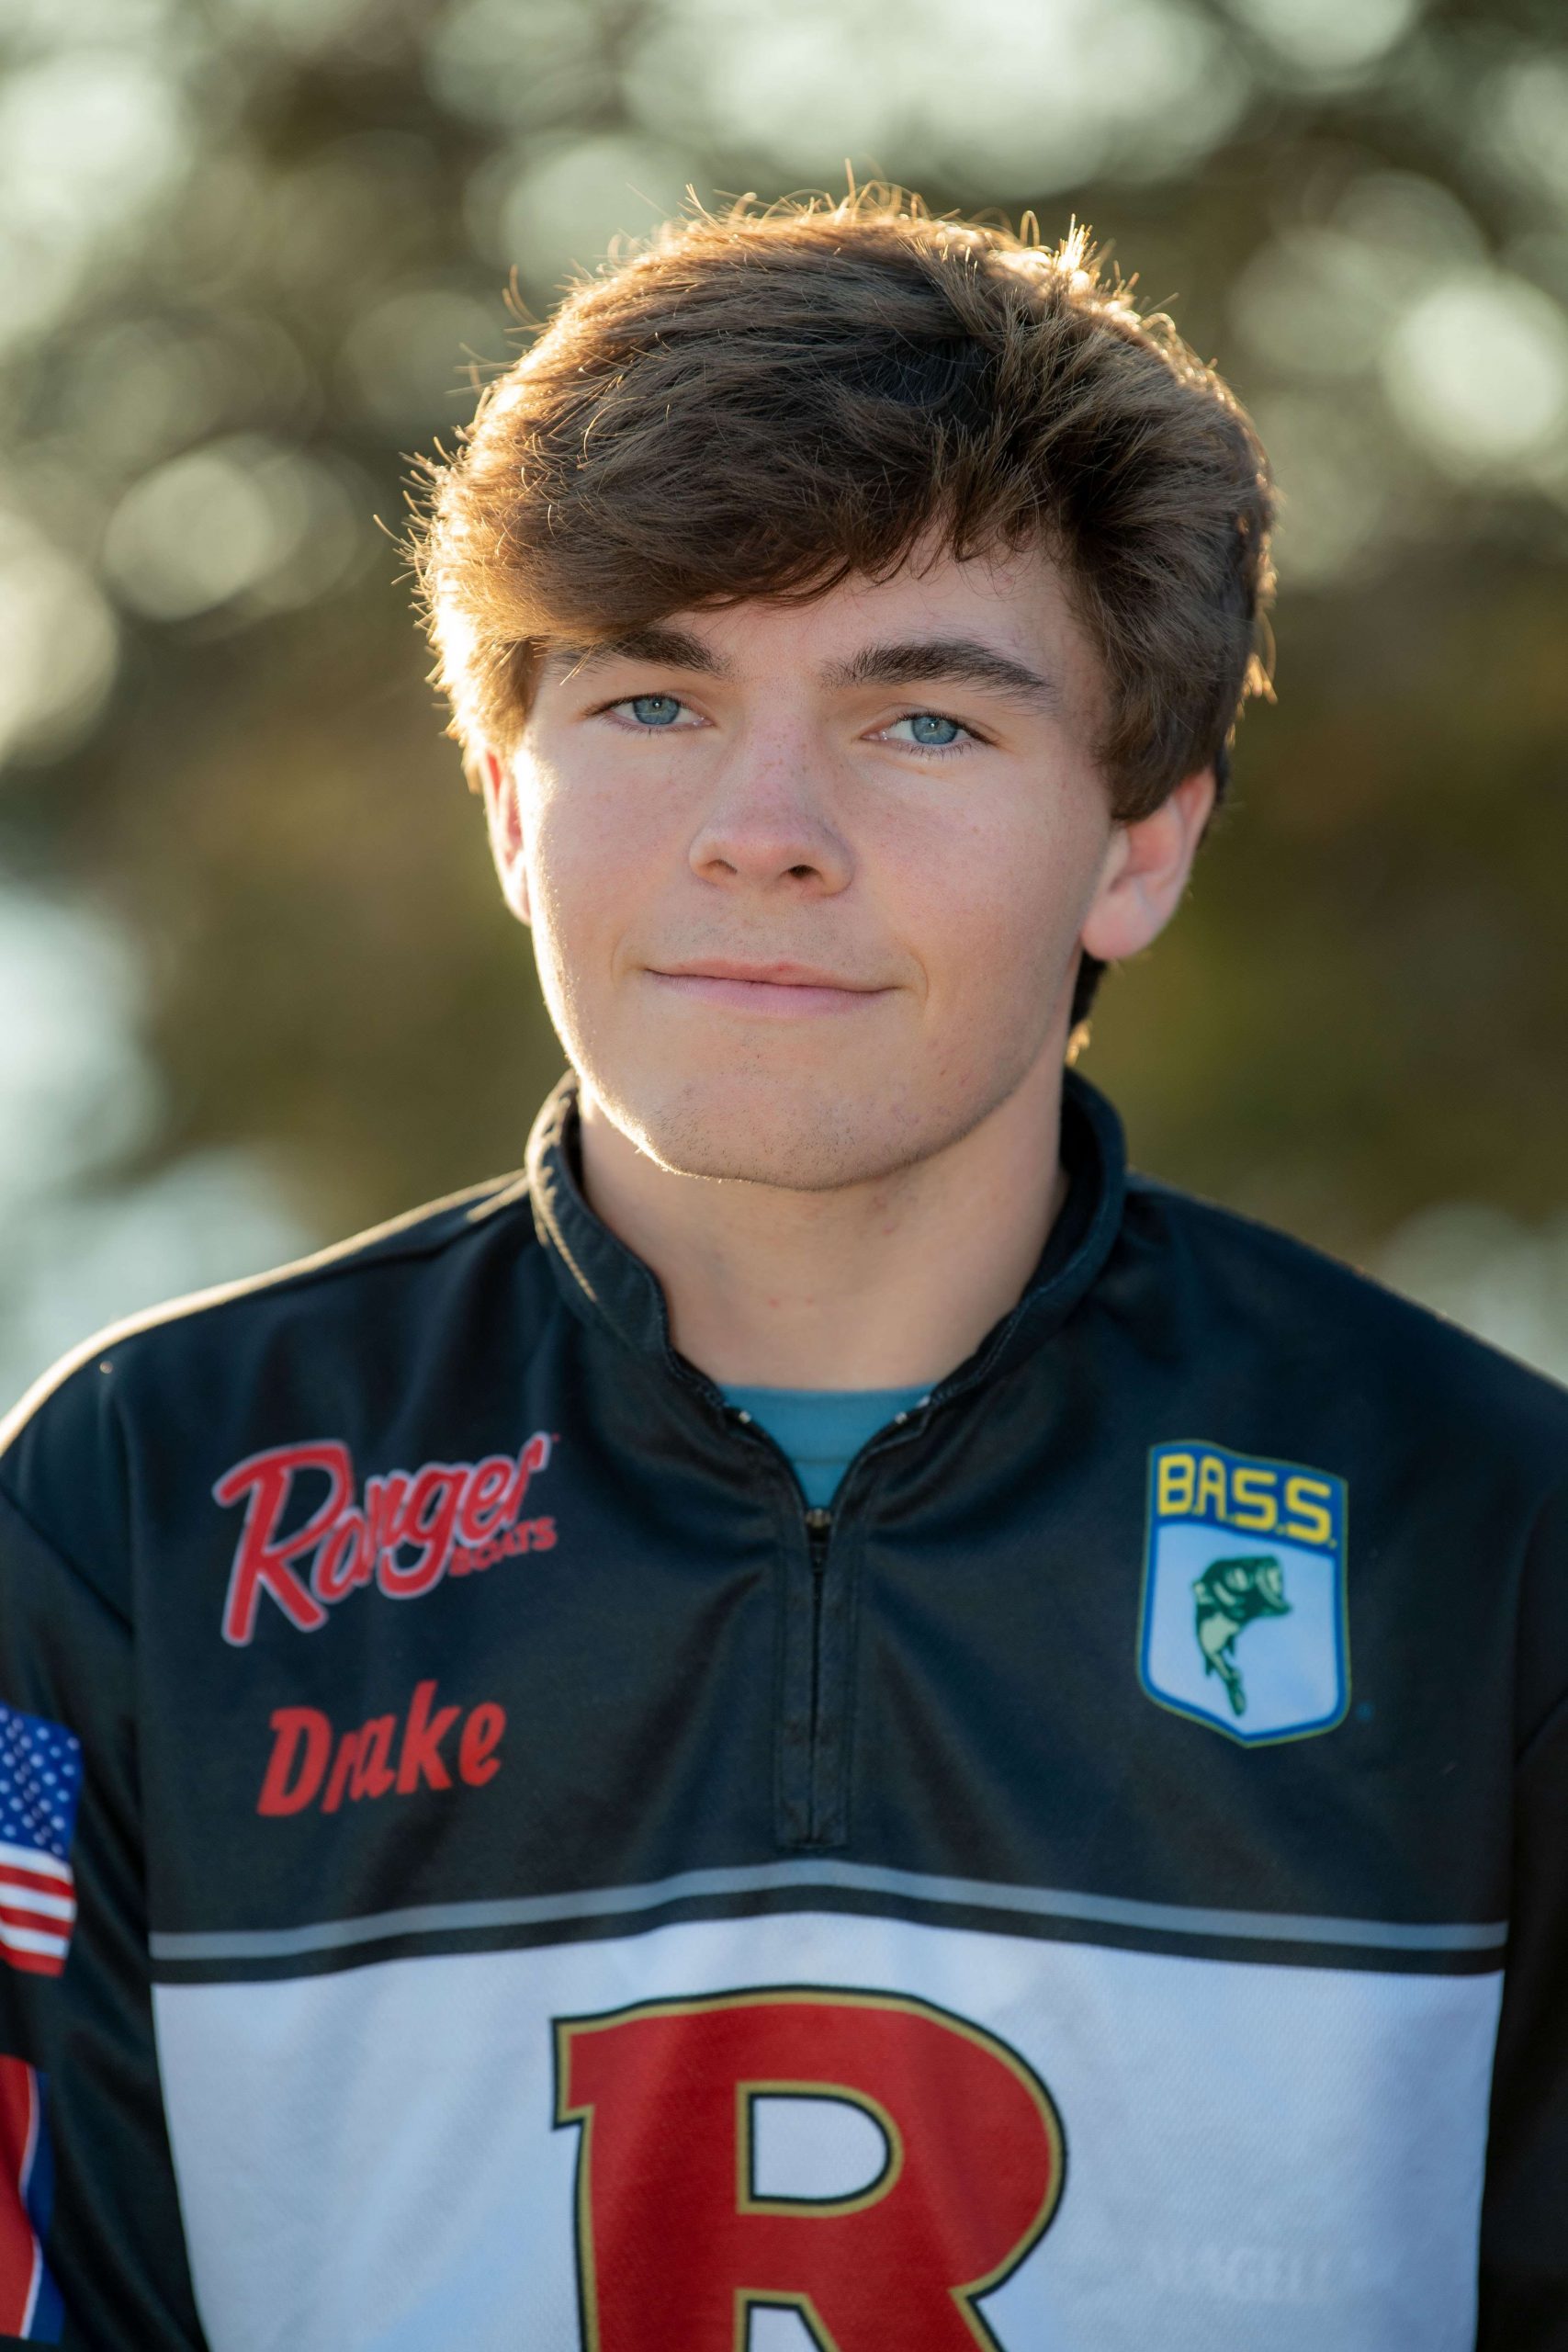 <b>Drake Hemby, Brentwood, Tenn. </b><br> A senior at Ravenwood High School , Hemby has earned three wins, four Top 5 finishes and two Top 20 finishes in the past tournament season. He has double qualified for the Bassmaster High School National Championship, is currently in first place in the Tennessee B.A.S.S. Nation points race and is currently in first place in the Central Tennessee Region B.A.S.S. Nation points race.  <p> Hemby served as the president of his former high school fishing team for two years before joining the Whitwell High School Fishing Team. As a member of the team, he has secured two team sponsors for the 2019-2020 tournament season.  <p> âDrake is one of the most humble and well-grounded high school anglers that I have ever met,â said Mikey Powell, Whitwell High School Fishing Team coach. âHe is one of the most versatile anglers currently fishing in the state of Tennessee. All in all, when you think of a Bassmaster High School All-American angler, you are thinking of Drake.â 